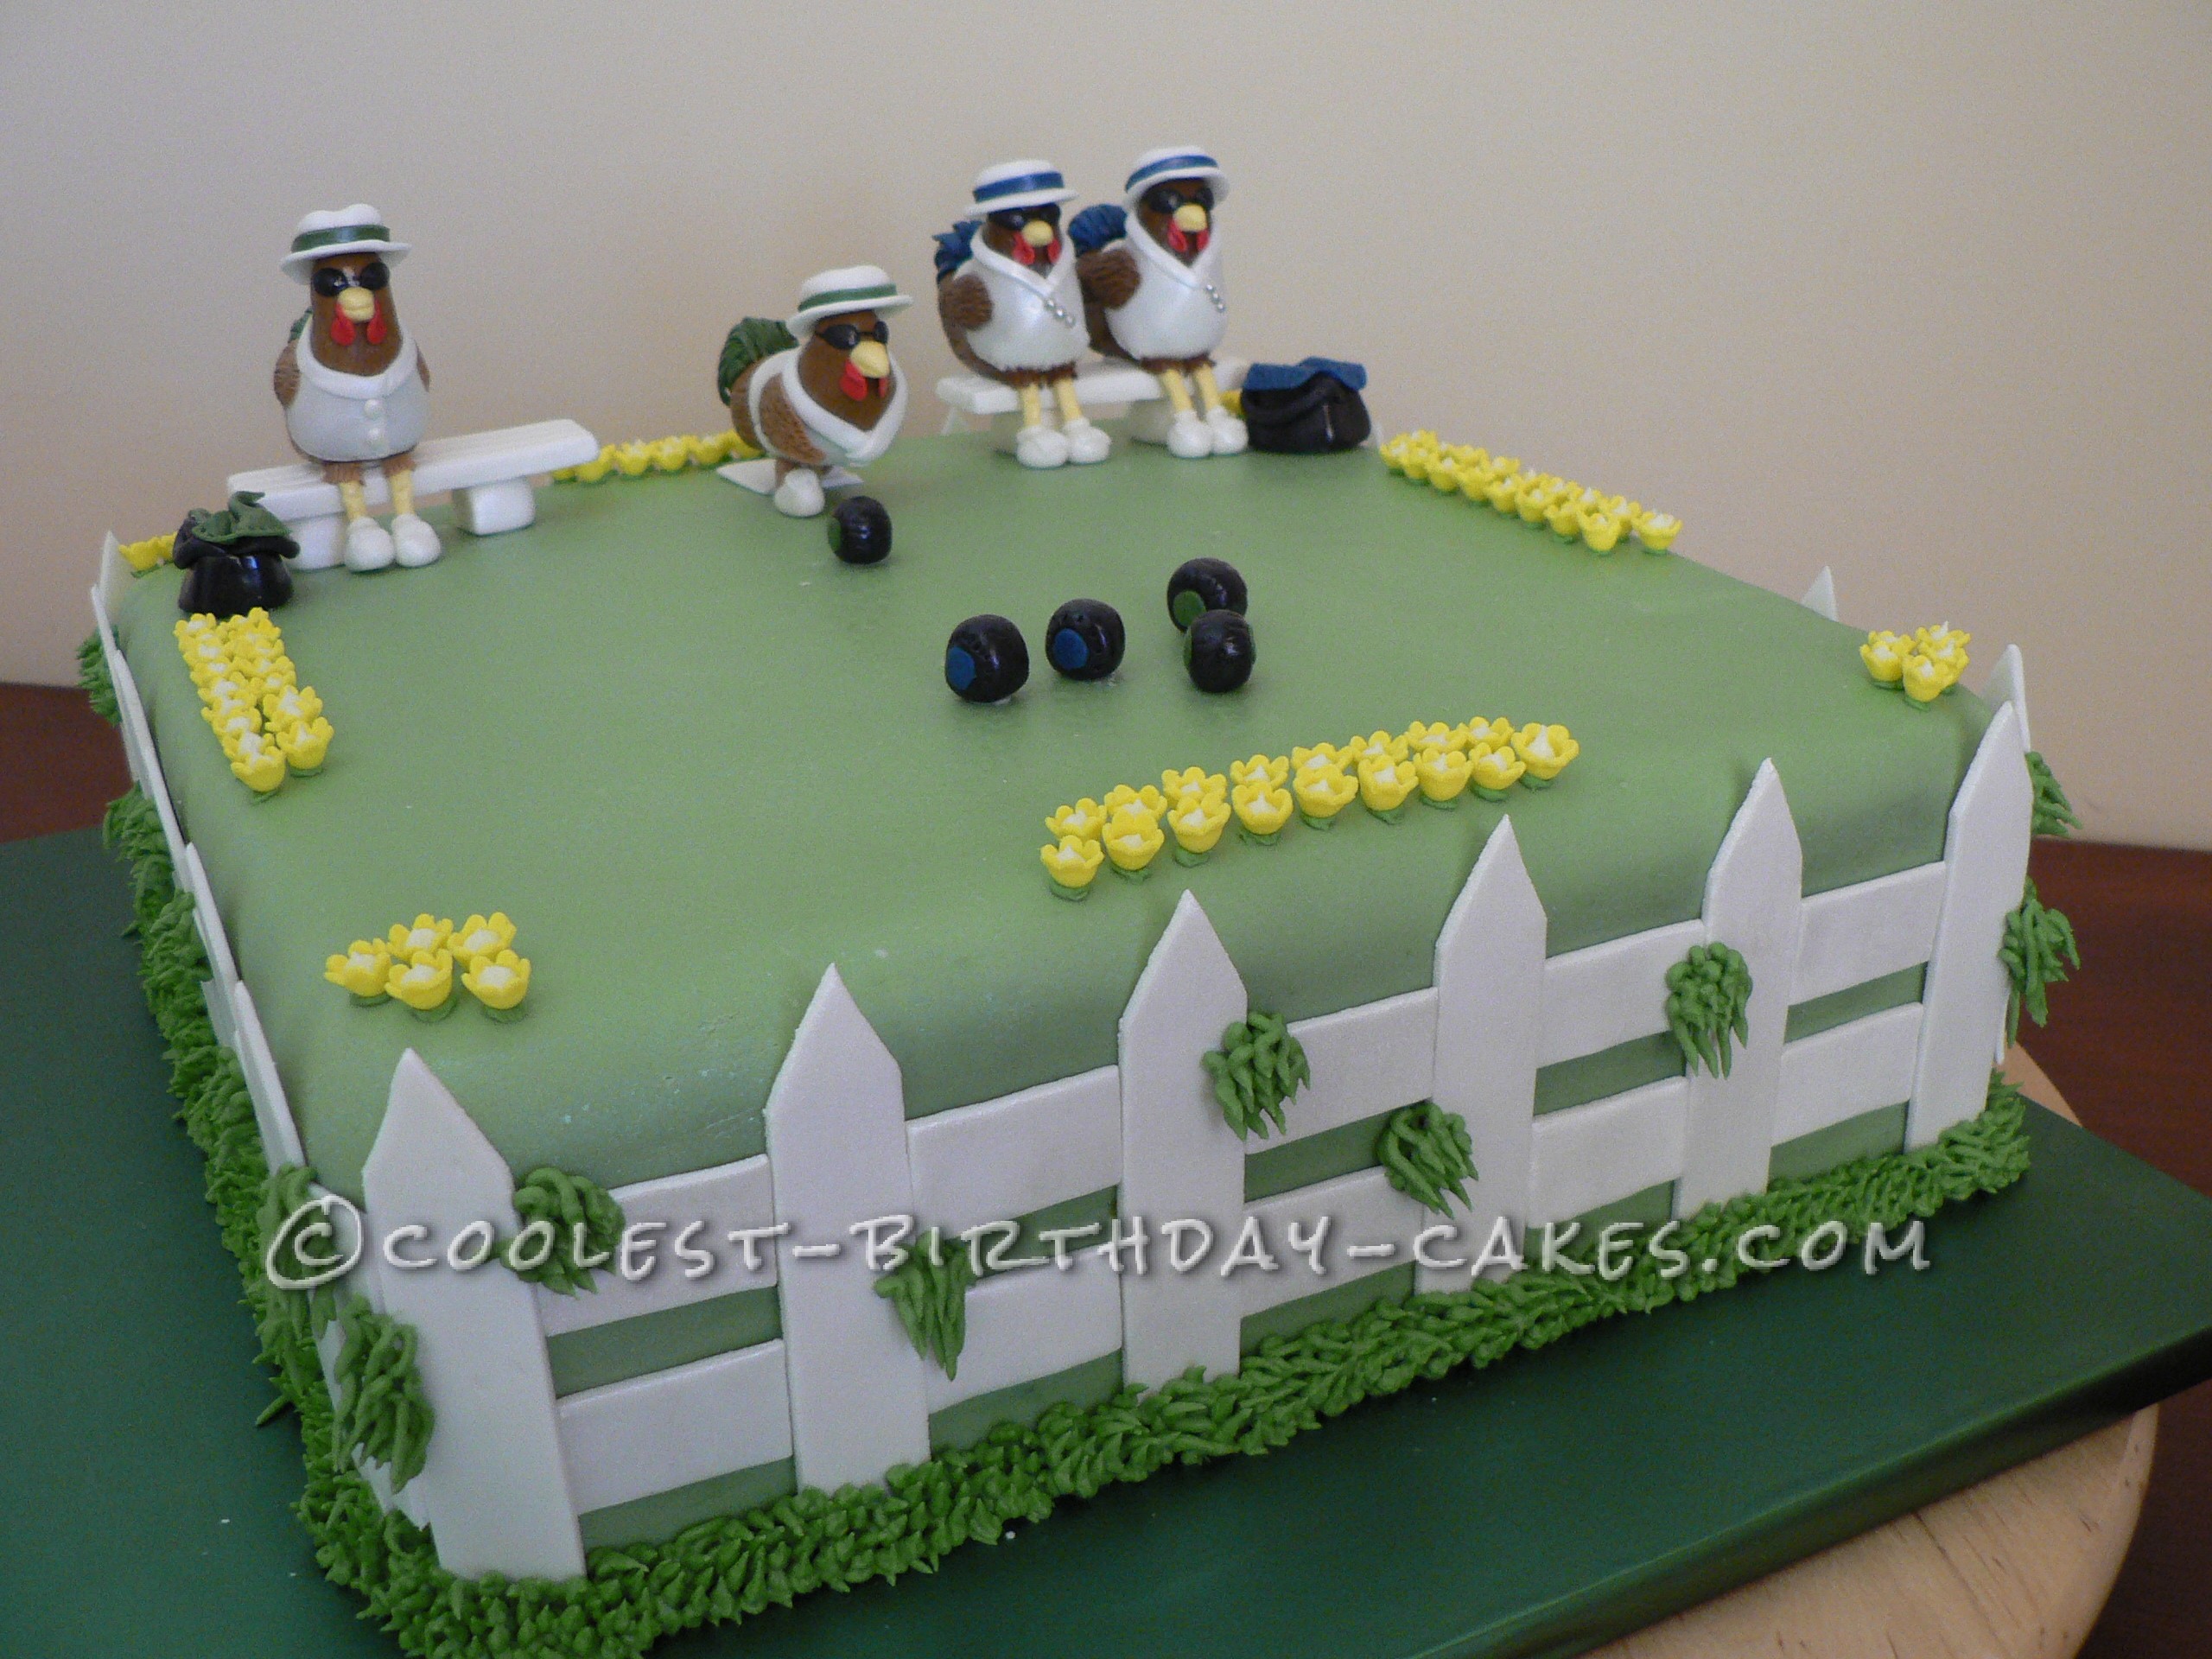 Cool 90th Birthday Cake Idea: Chickens Playing Lawn Bowls